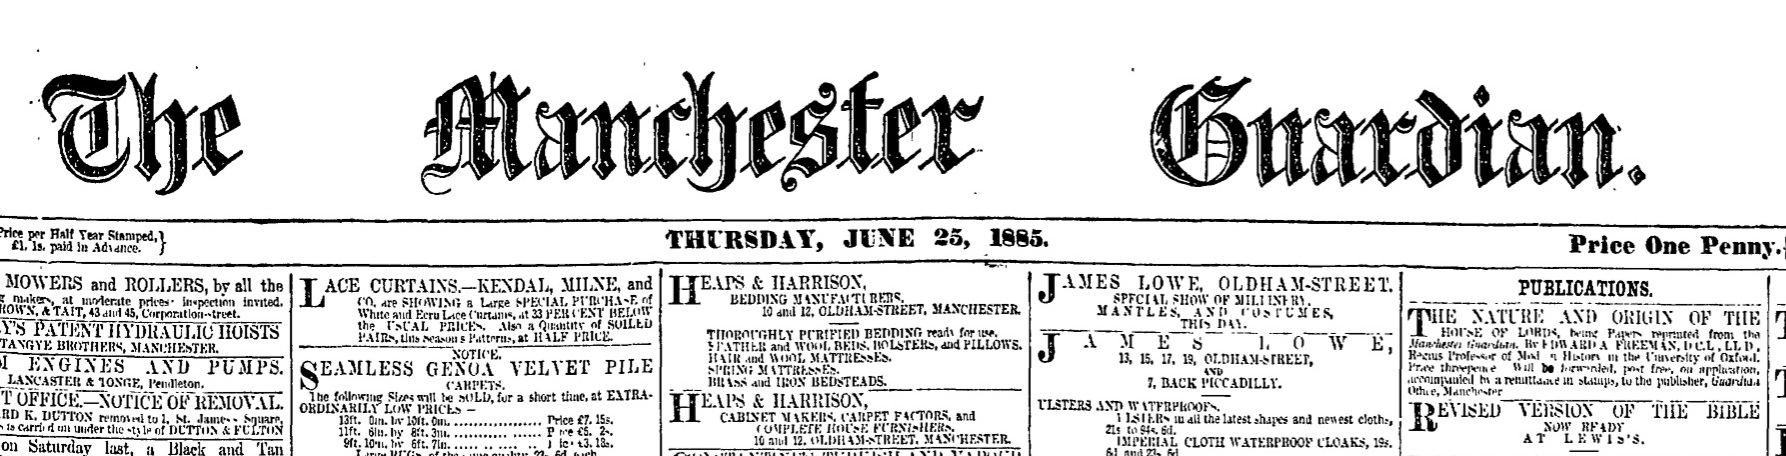 Manchester Guardian 25.6.1885 ProQuest Historical Newspapers: The Guardian (1821-2003) and The Observer (1791-2003)